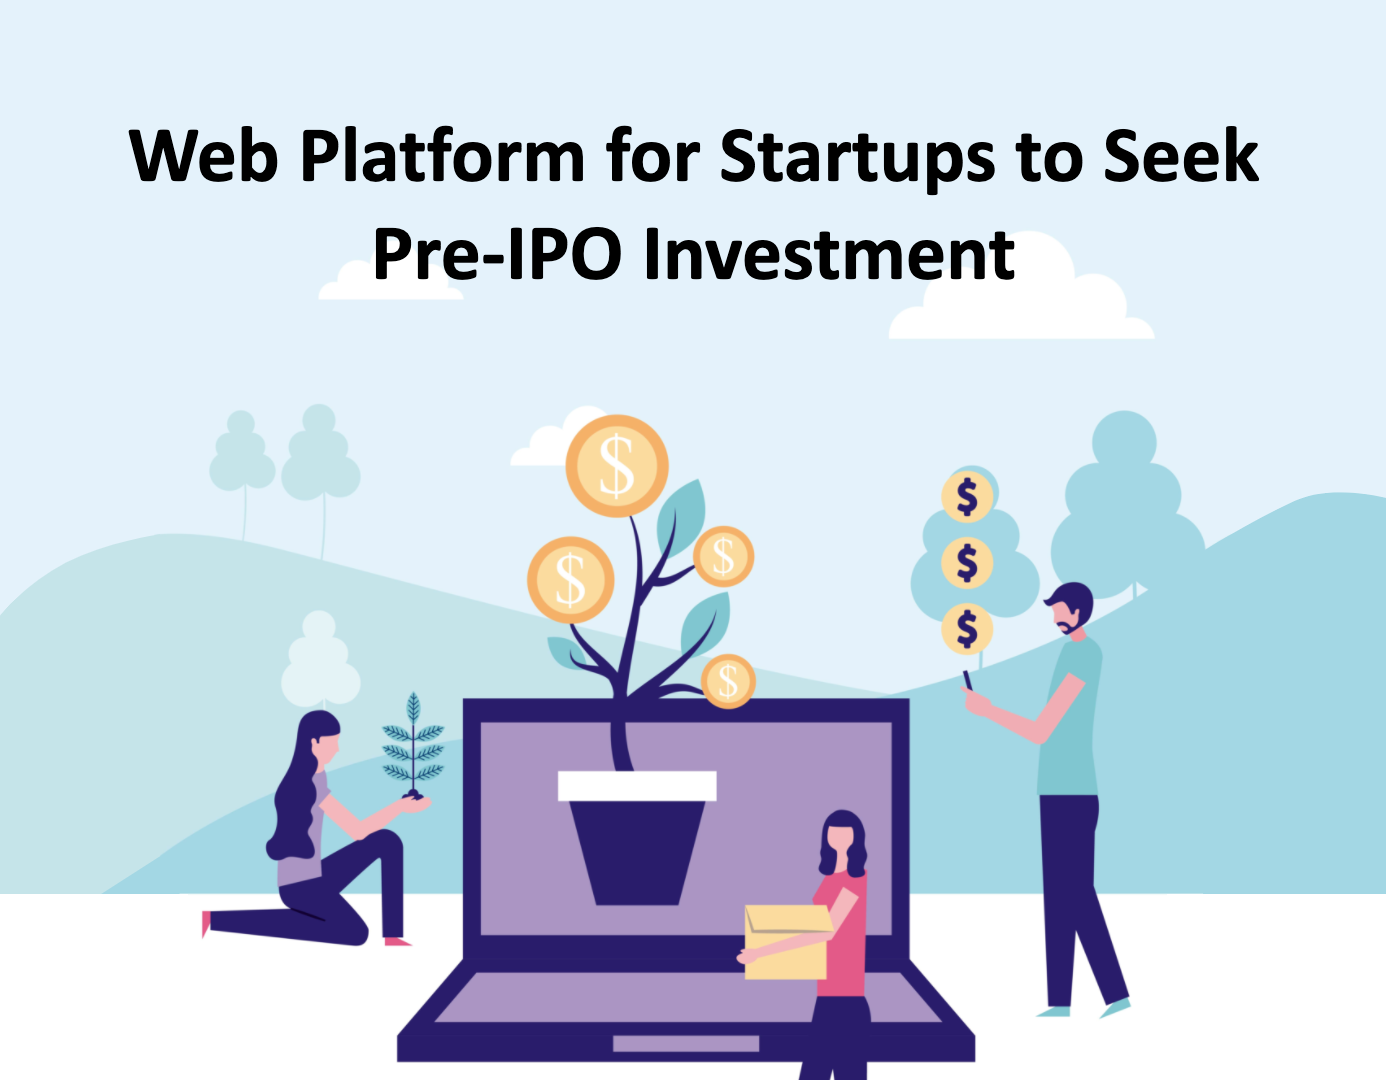 Web platform for startups to seek pre-IPO investment